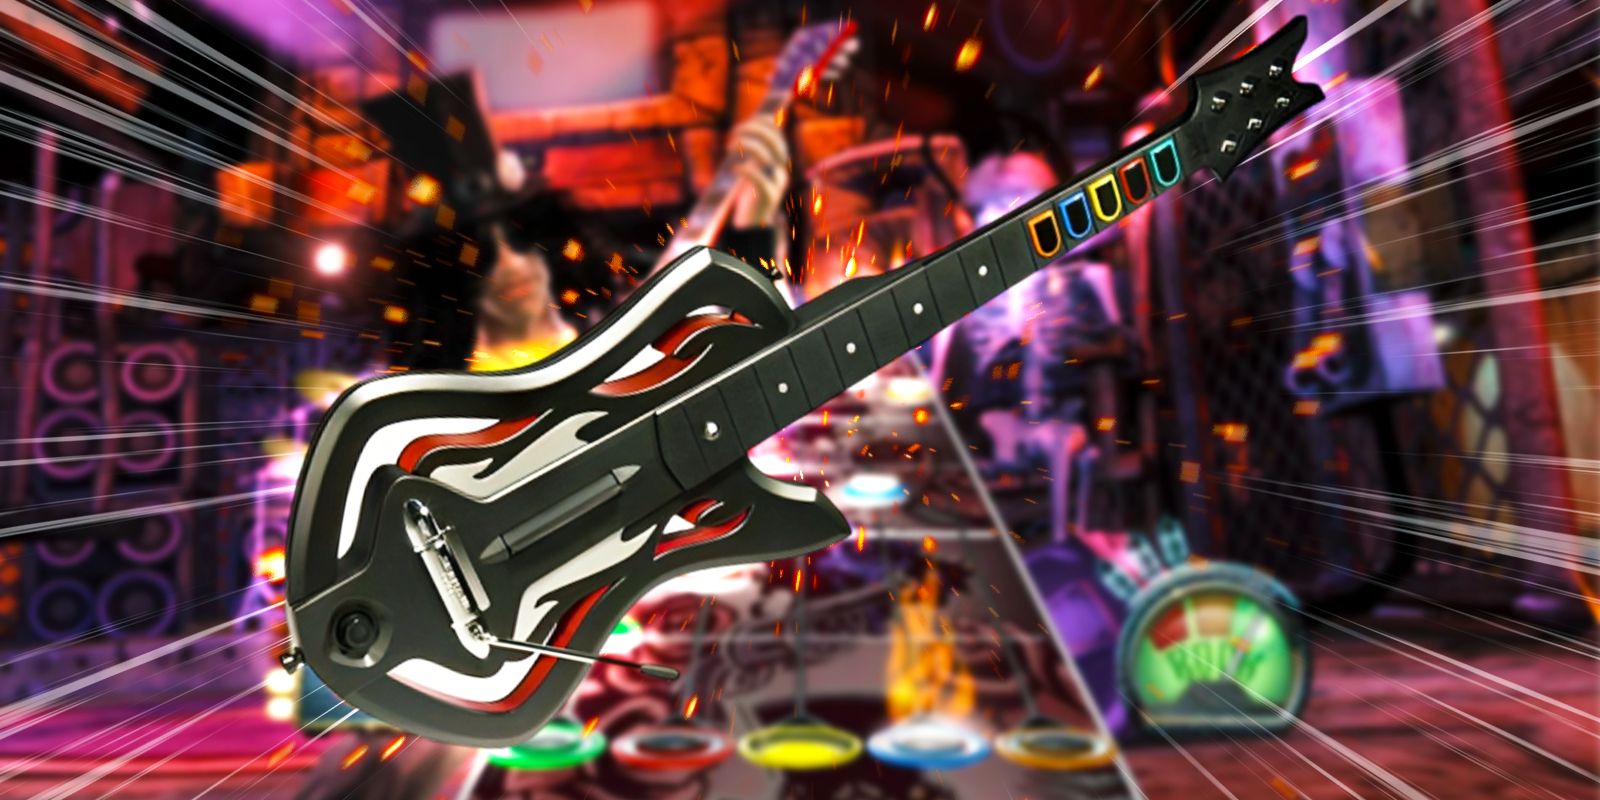 Rock Band vs Guitar Hero: Which One Is Better in 2023?